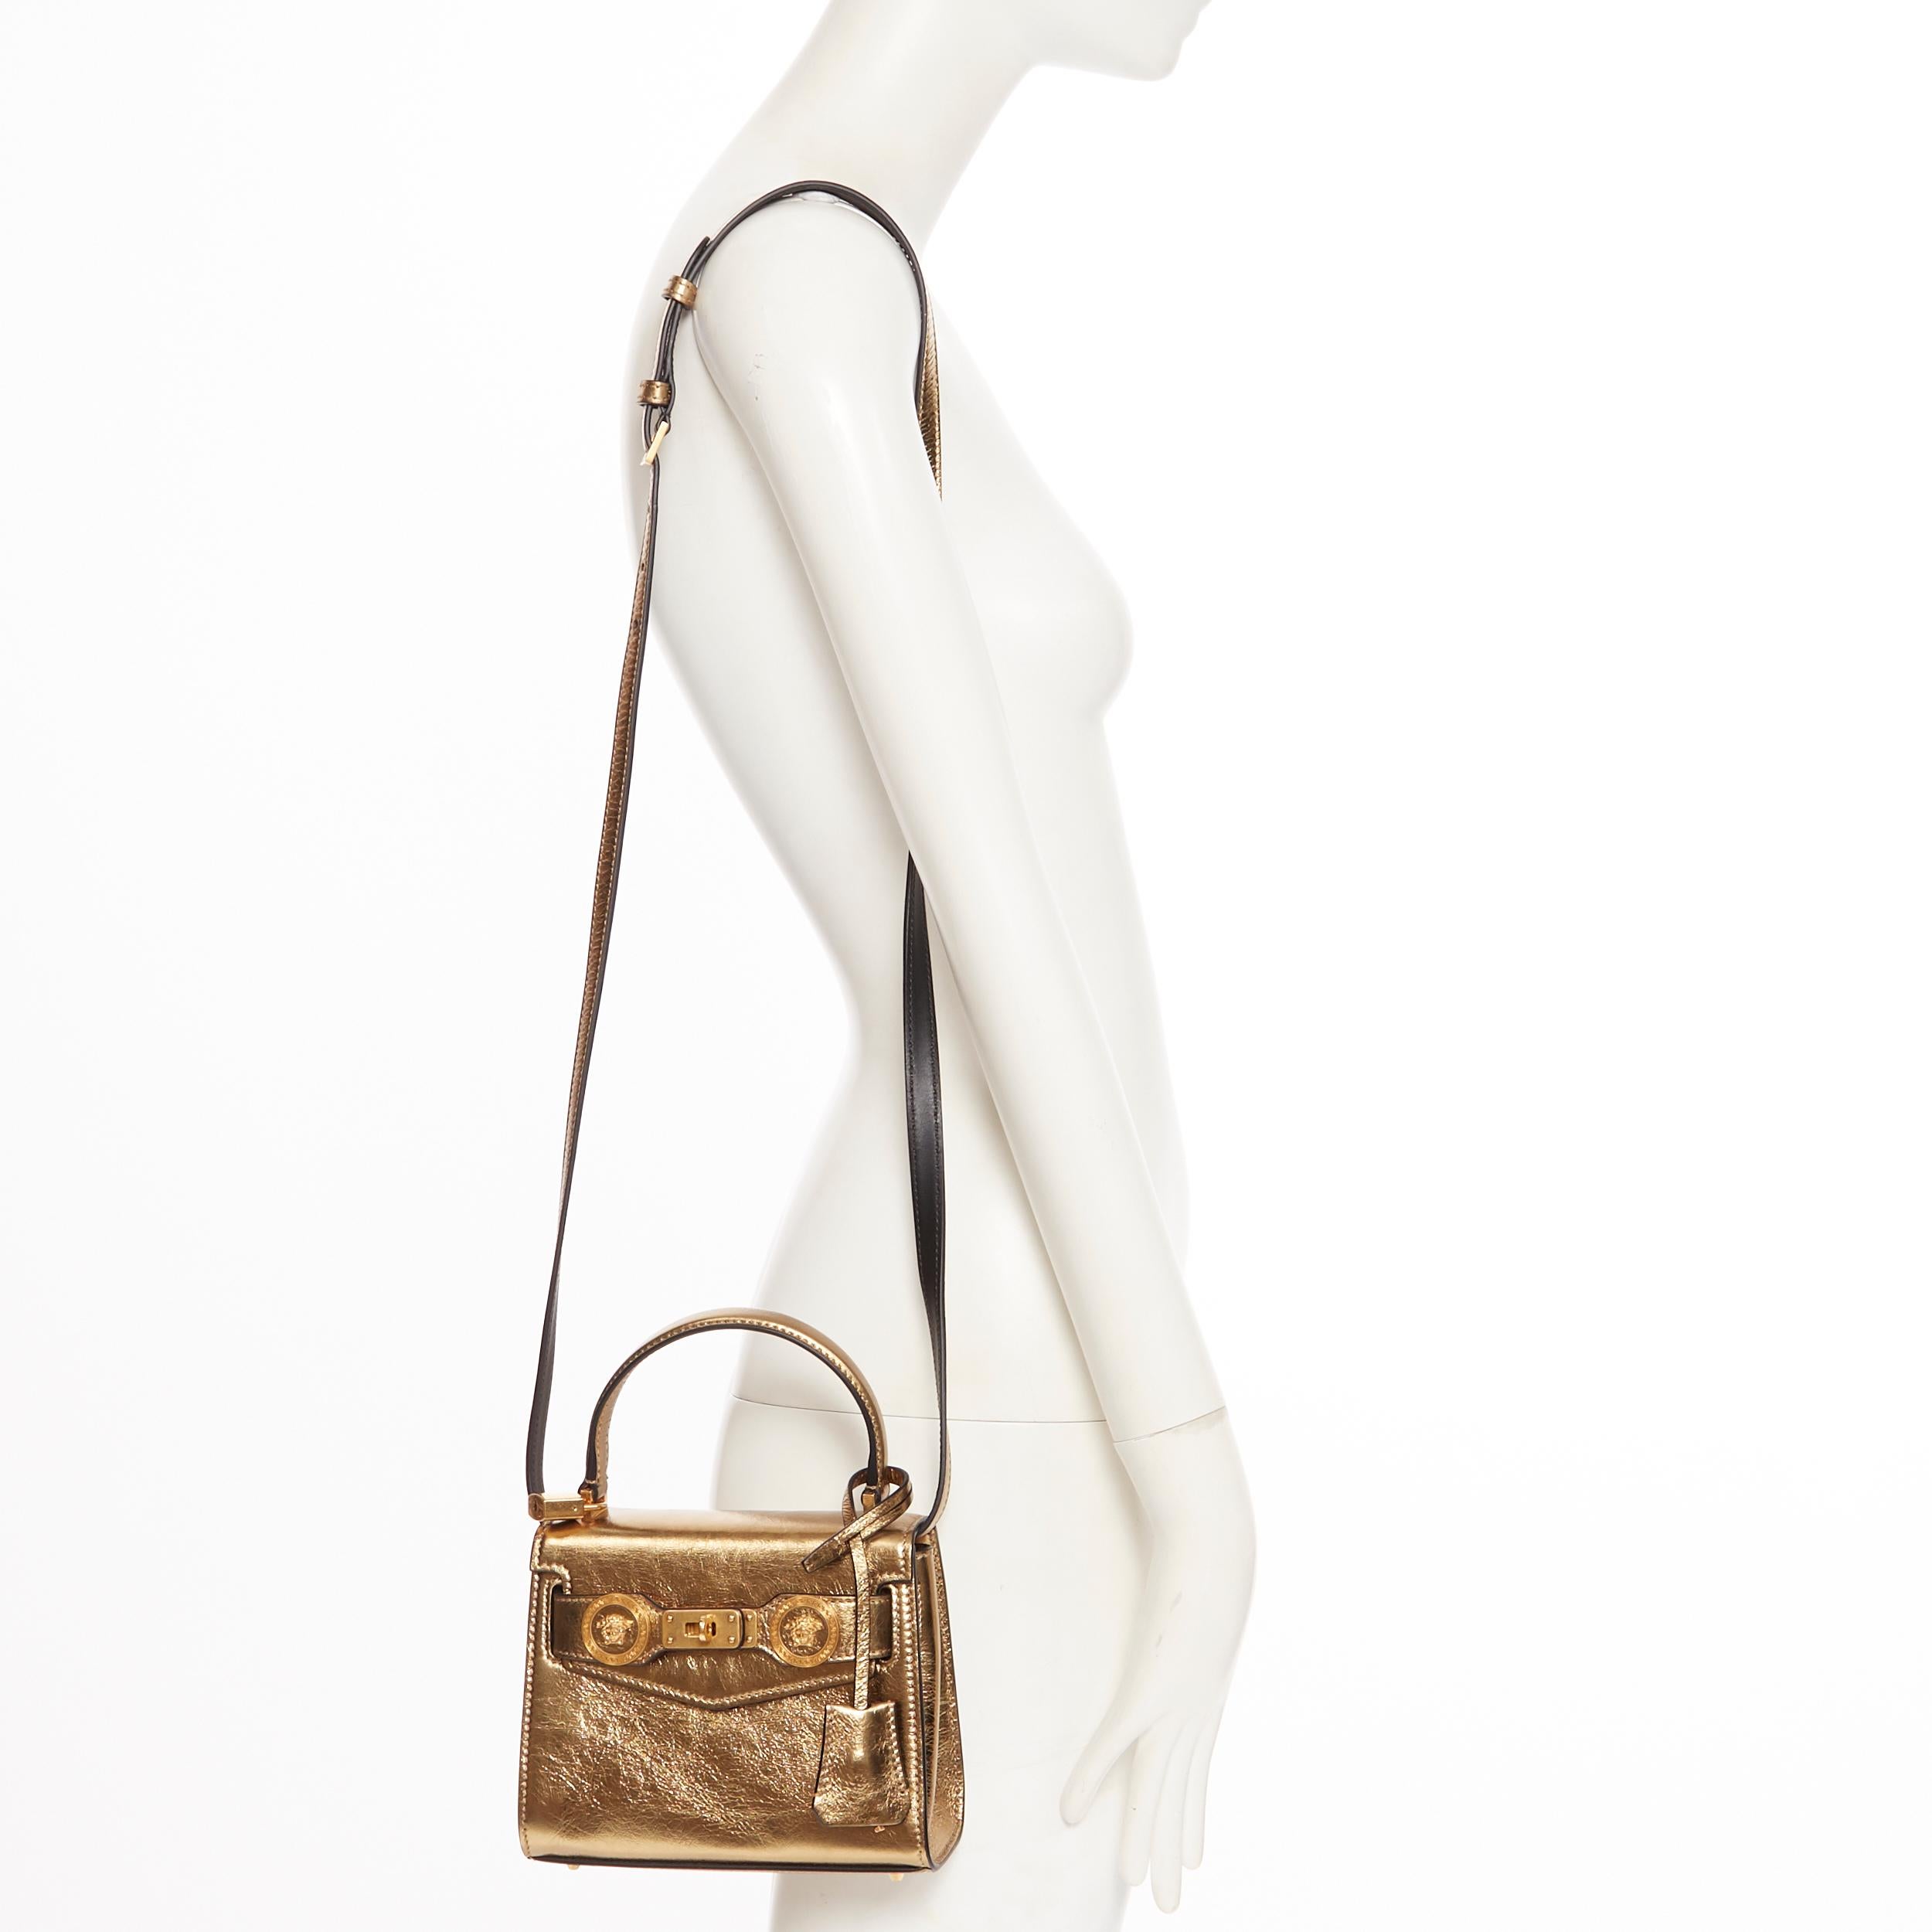 new VERSACE SS18 Diana Icon metallic gold calf leather Medusa mini kelly bag
Brand: Versace
Designer: Donatella Versace
Collection: Spring Summer 2018
Model Name / Style: Diana Icon
Material: Leather; calfskin leather
Color: Gold
Pattern: